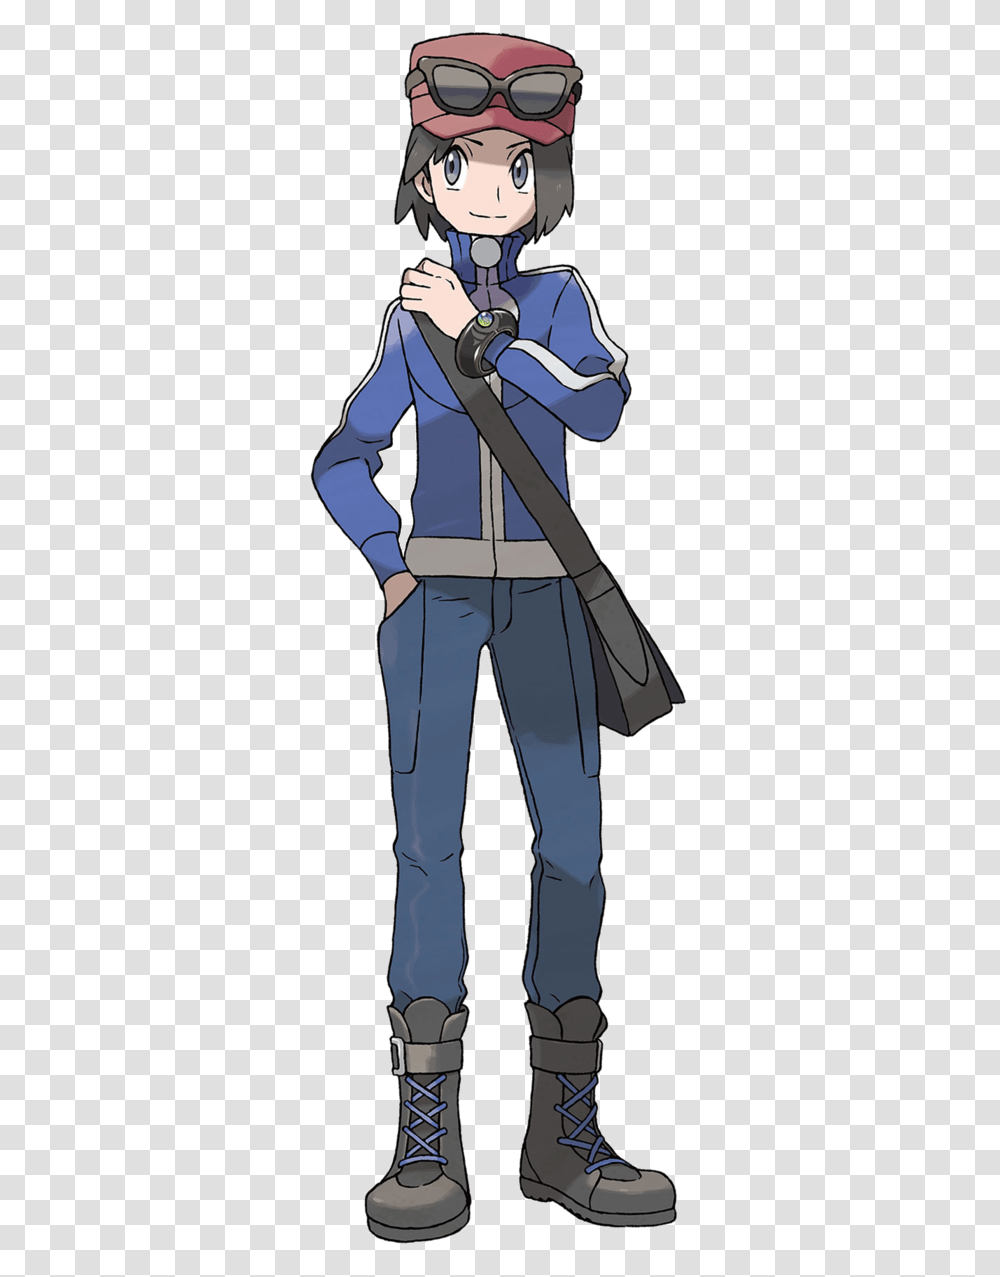 Pokemon Xy Trainer, Person, Sunglasses, Overcoat Transparent Png